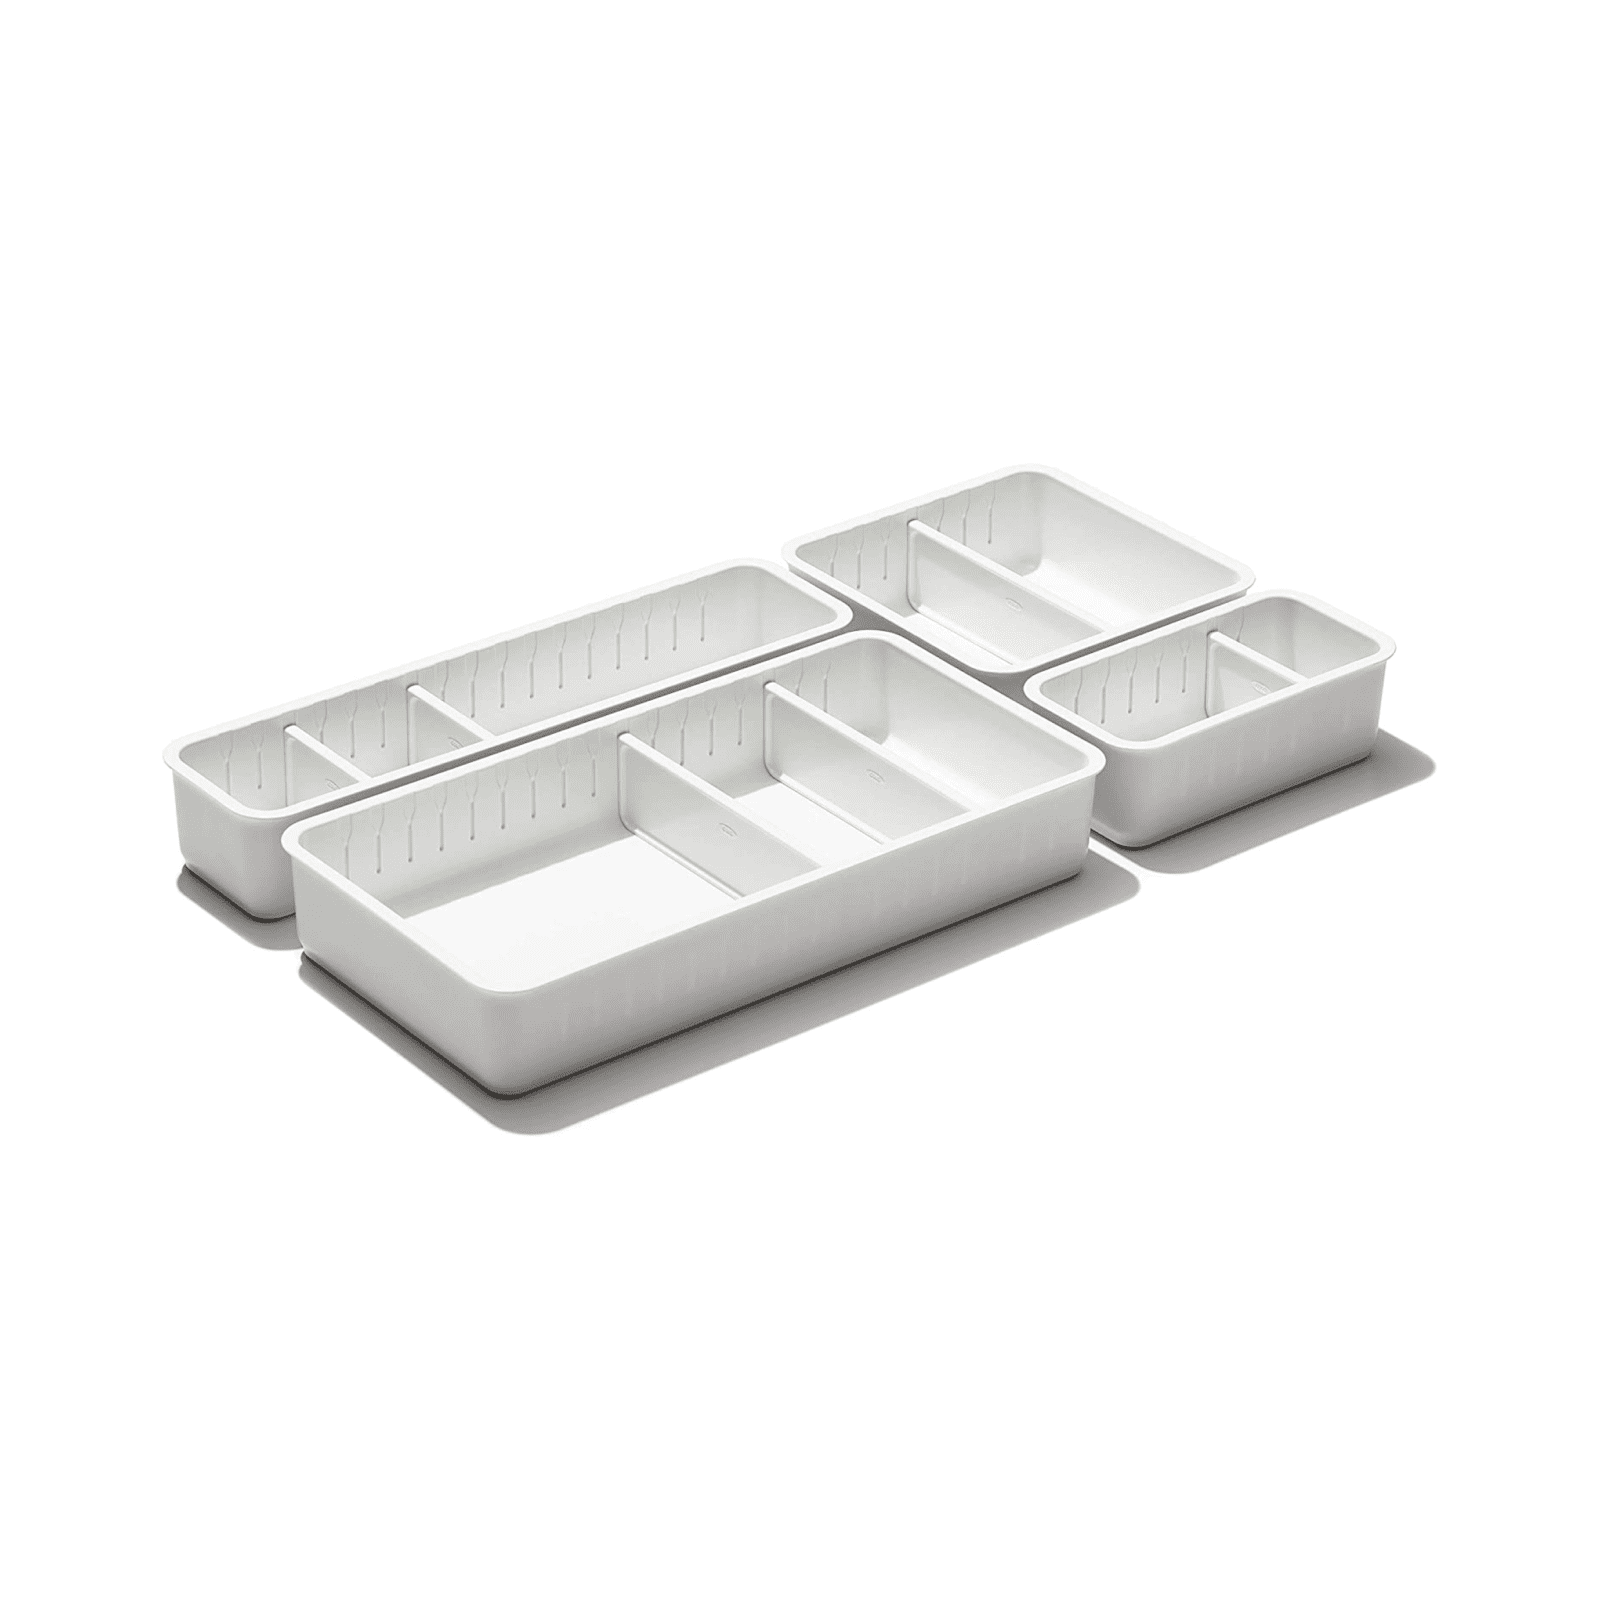 Home Organization Products I Have and Love, Starting at $11